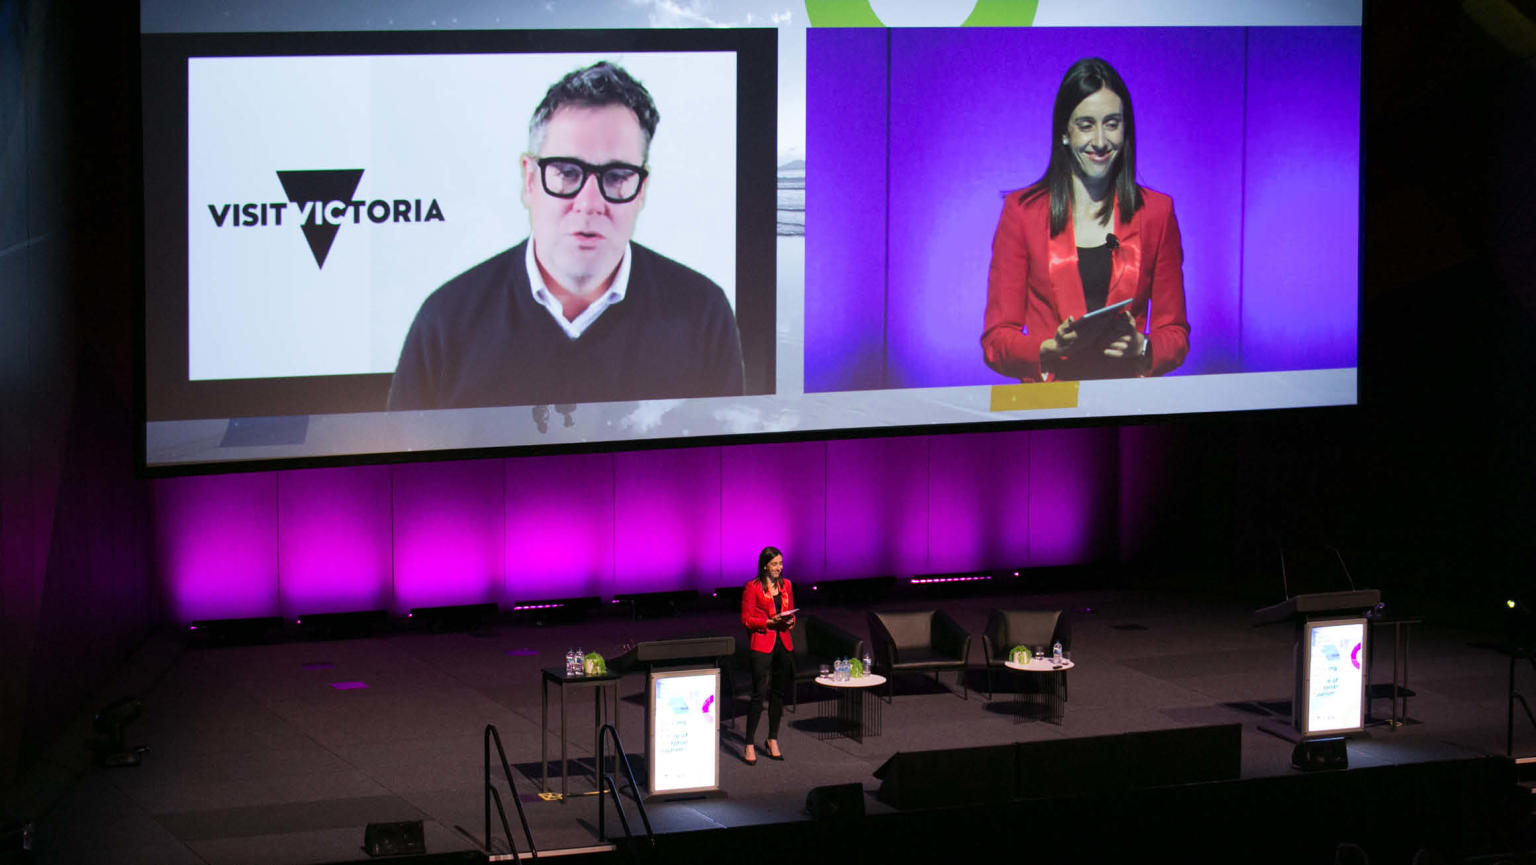 A woman confidently stands on a stage adorned with armchairs, tables, and a podium, dressed in a striking red blazer. Behind her, a sizeable digital screen displays a real-time feed of herself alongside a man speaking, accompanied by a logo next to him. The stage setup creates a dynamic and visually engaging backdrop for the speaker.